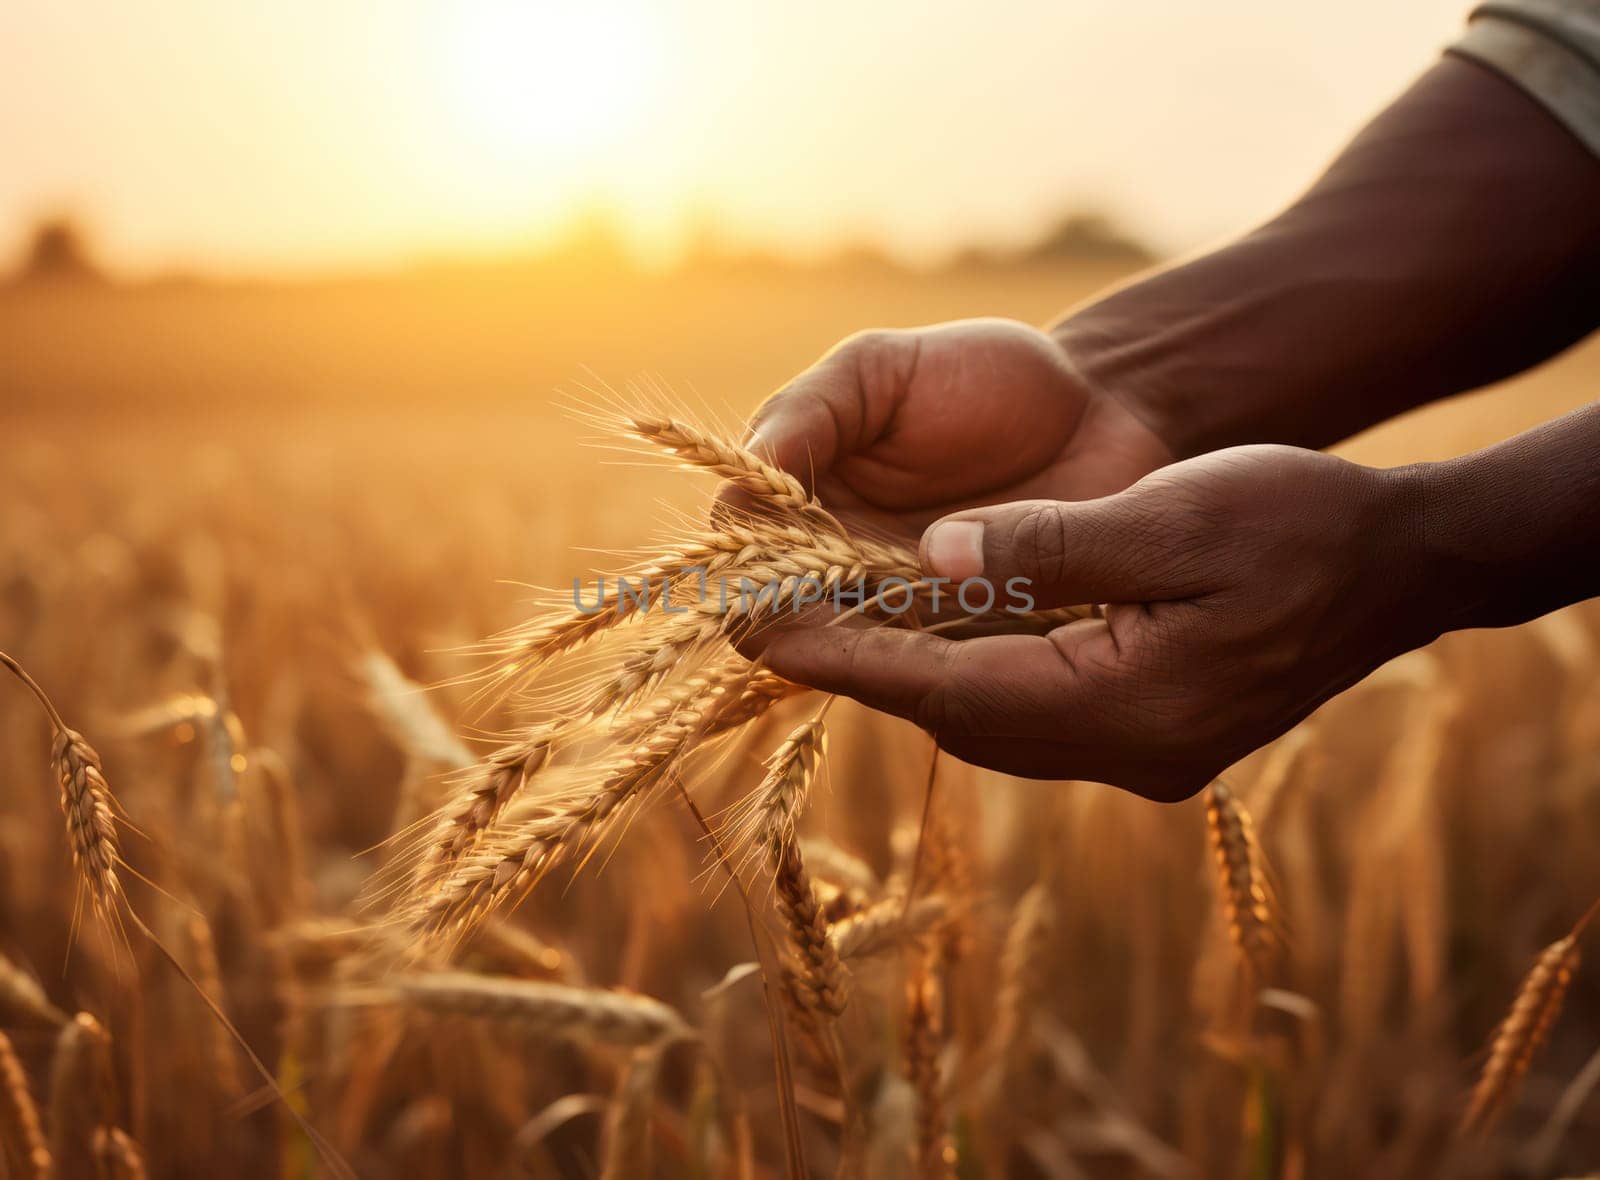 Golden Harvest: A Farmer's Hands Reaping Organic Rye in the Autumn Field under a Vibrant Sunset Sky by Vichizh